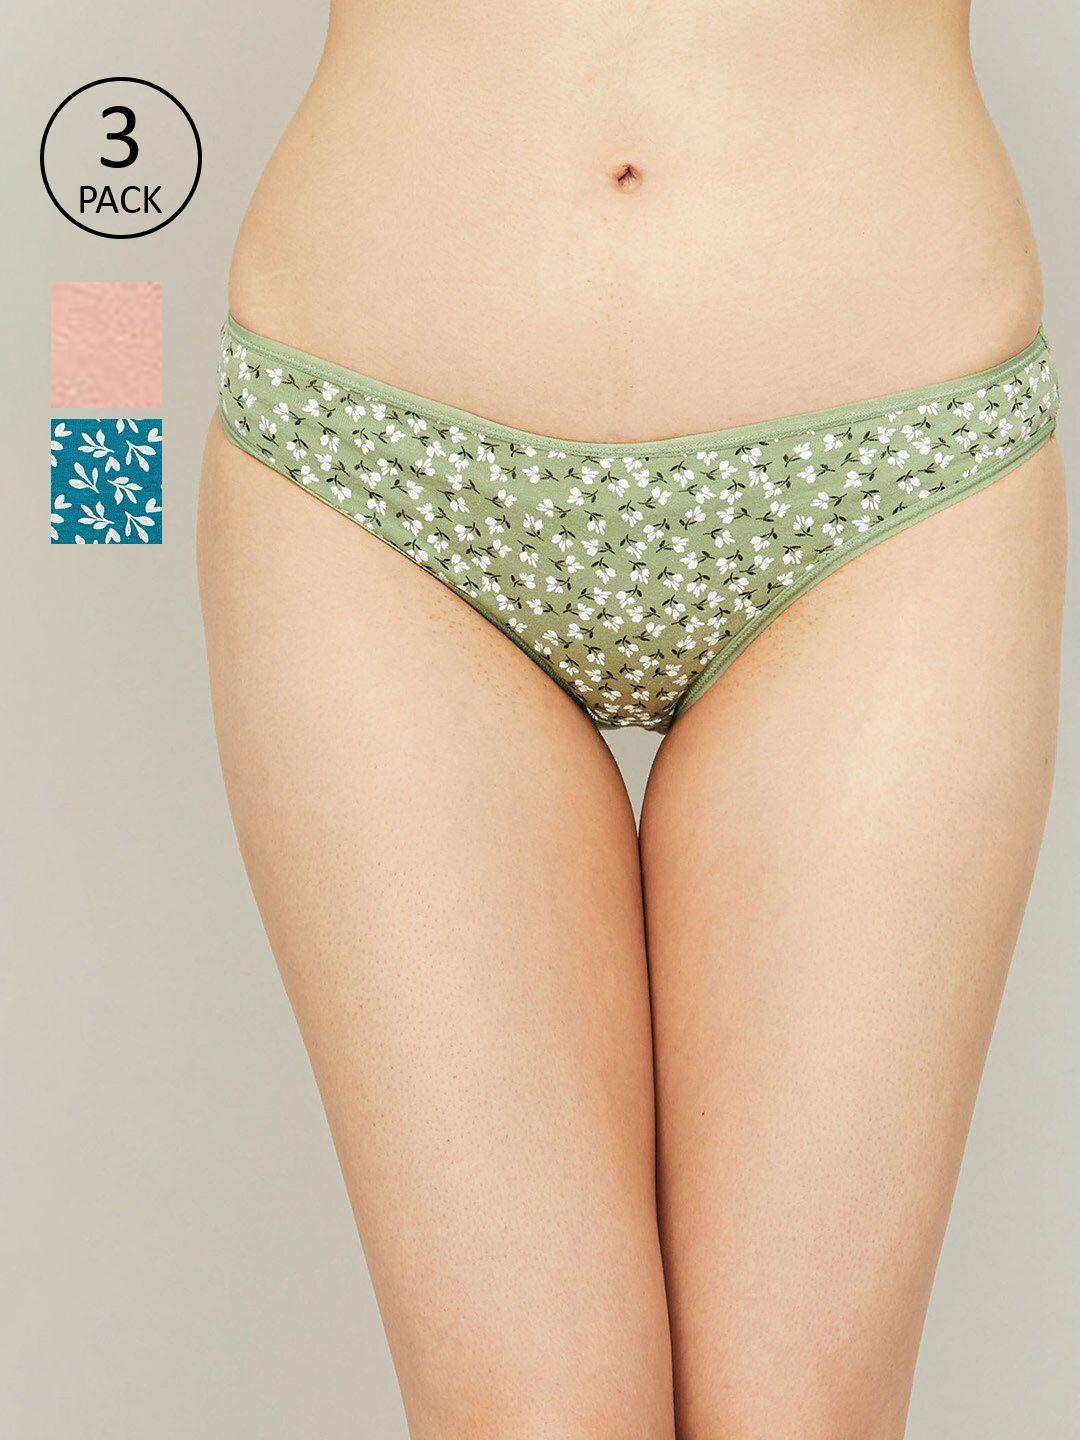 ginger-by-lifestyle-pack-of-3-printed-cotton-briefs-1000011690604-blush